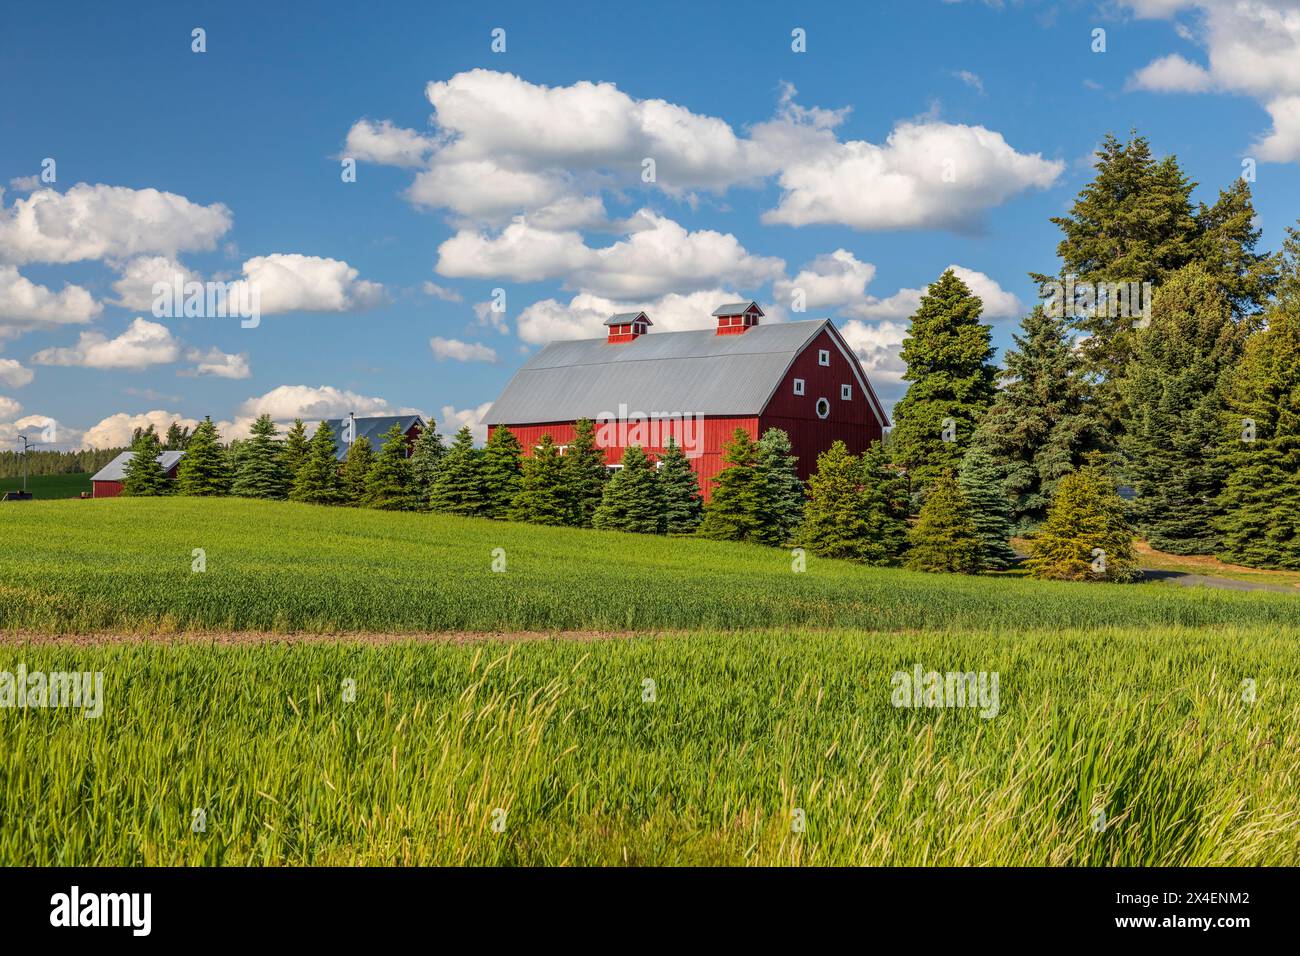 USA, Idaho, Potlatch. Red barn, blue sky, white clouds. (Editorial Use Only) Stock Photo